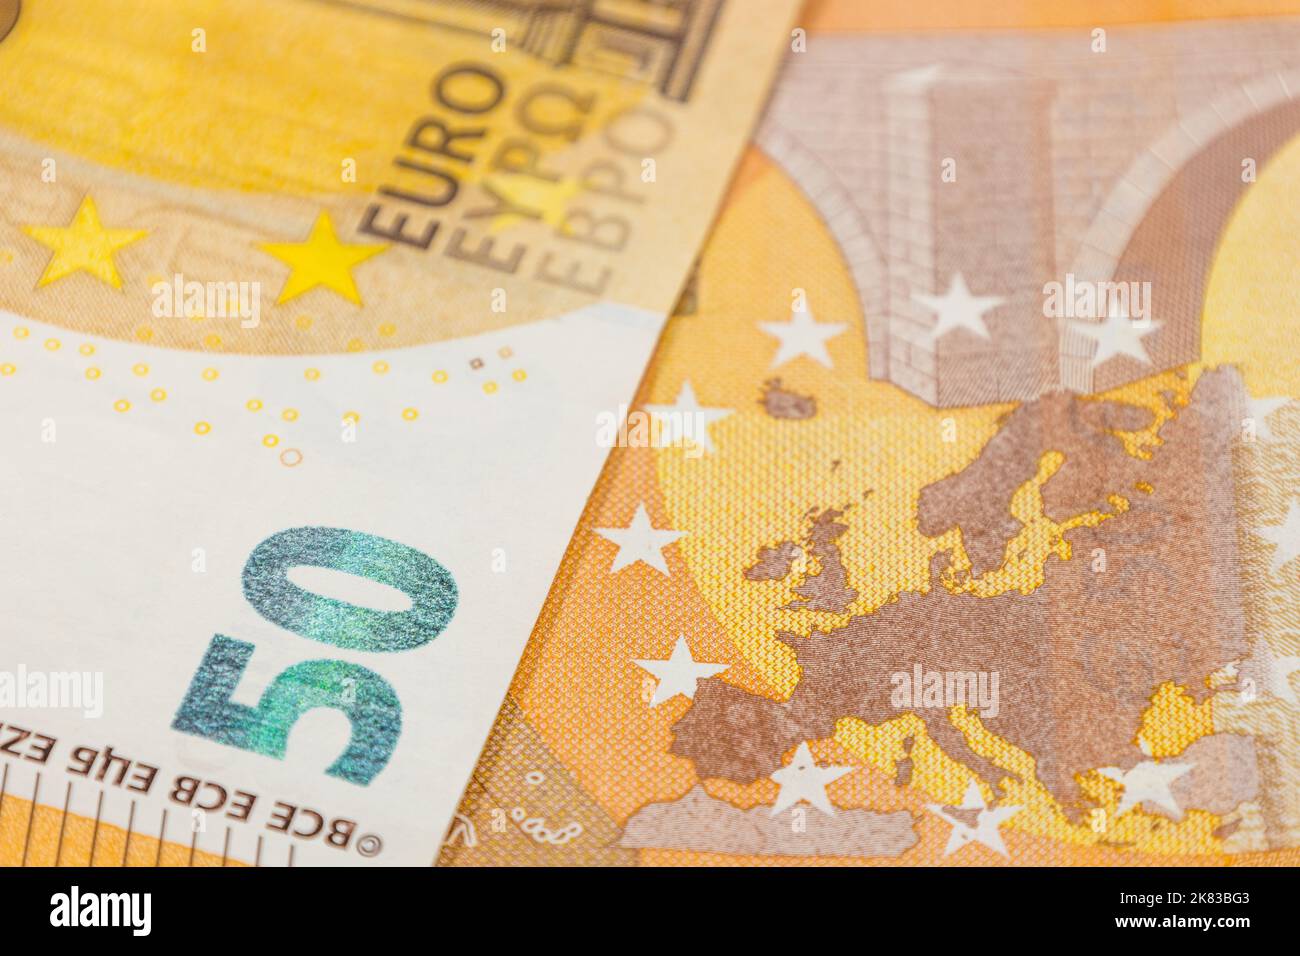 Europe map on a fifty euro banknote. Concept of uniting European countries Stock Photo